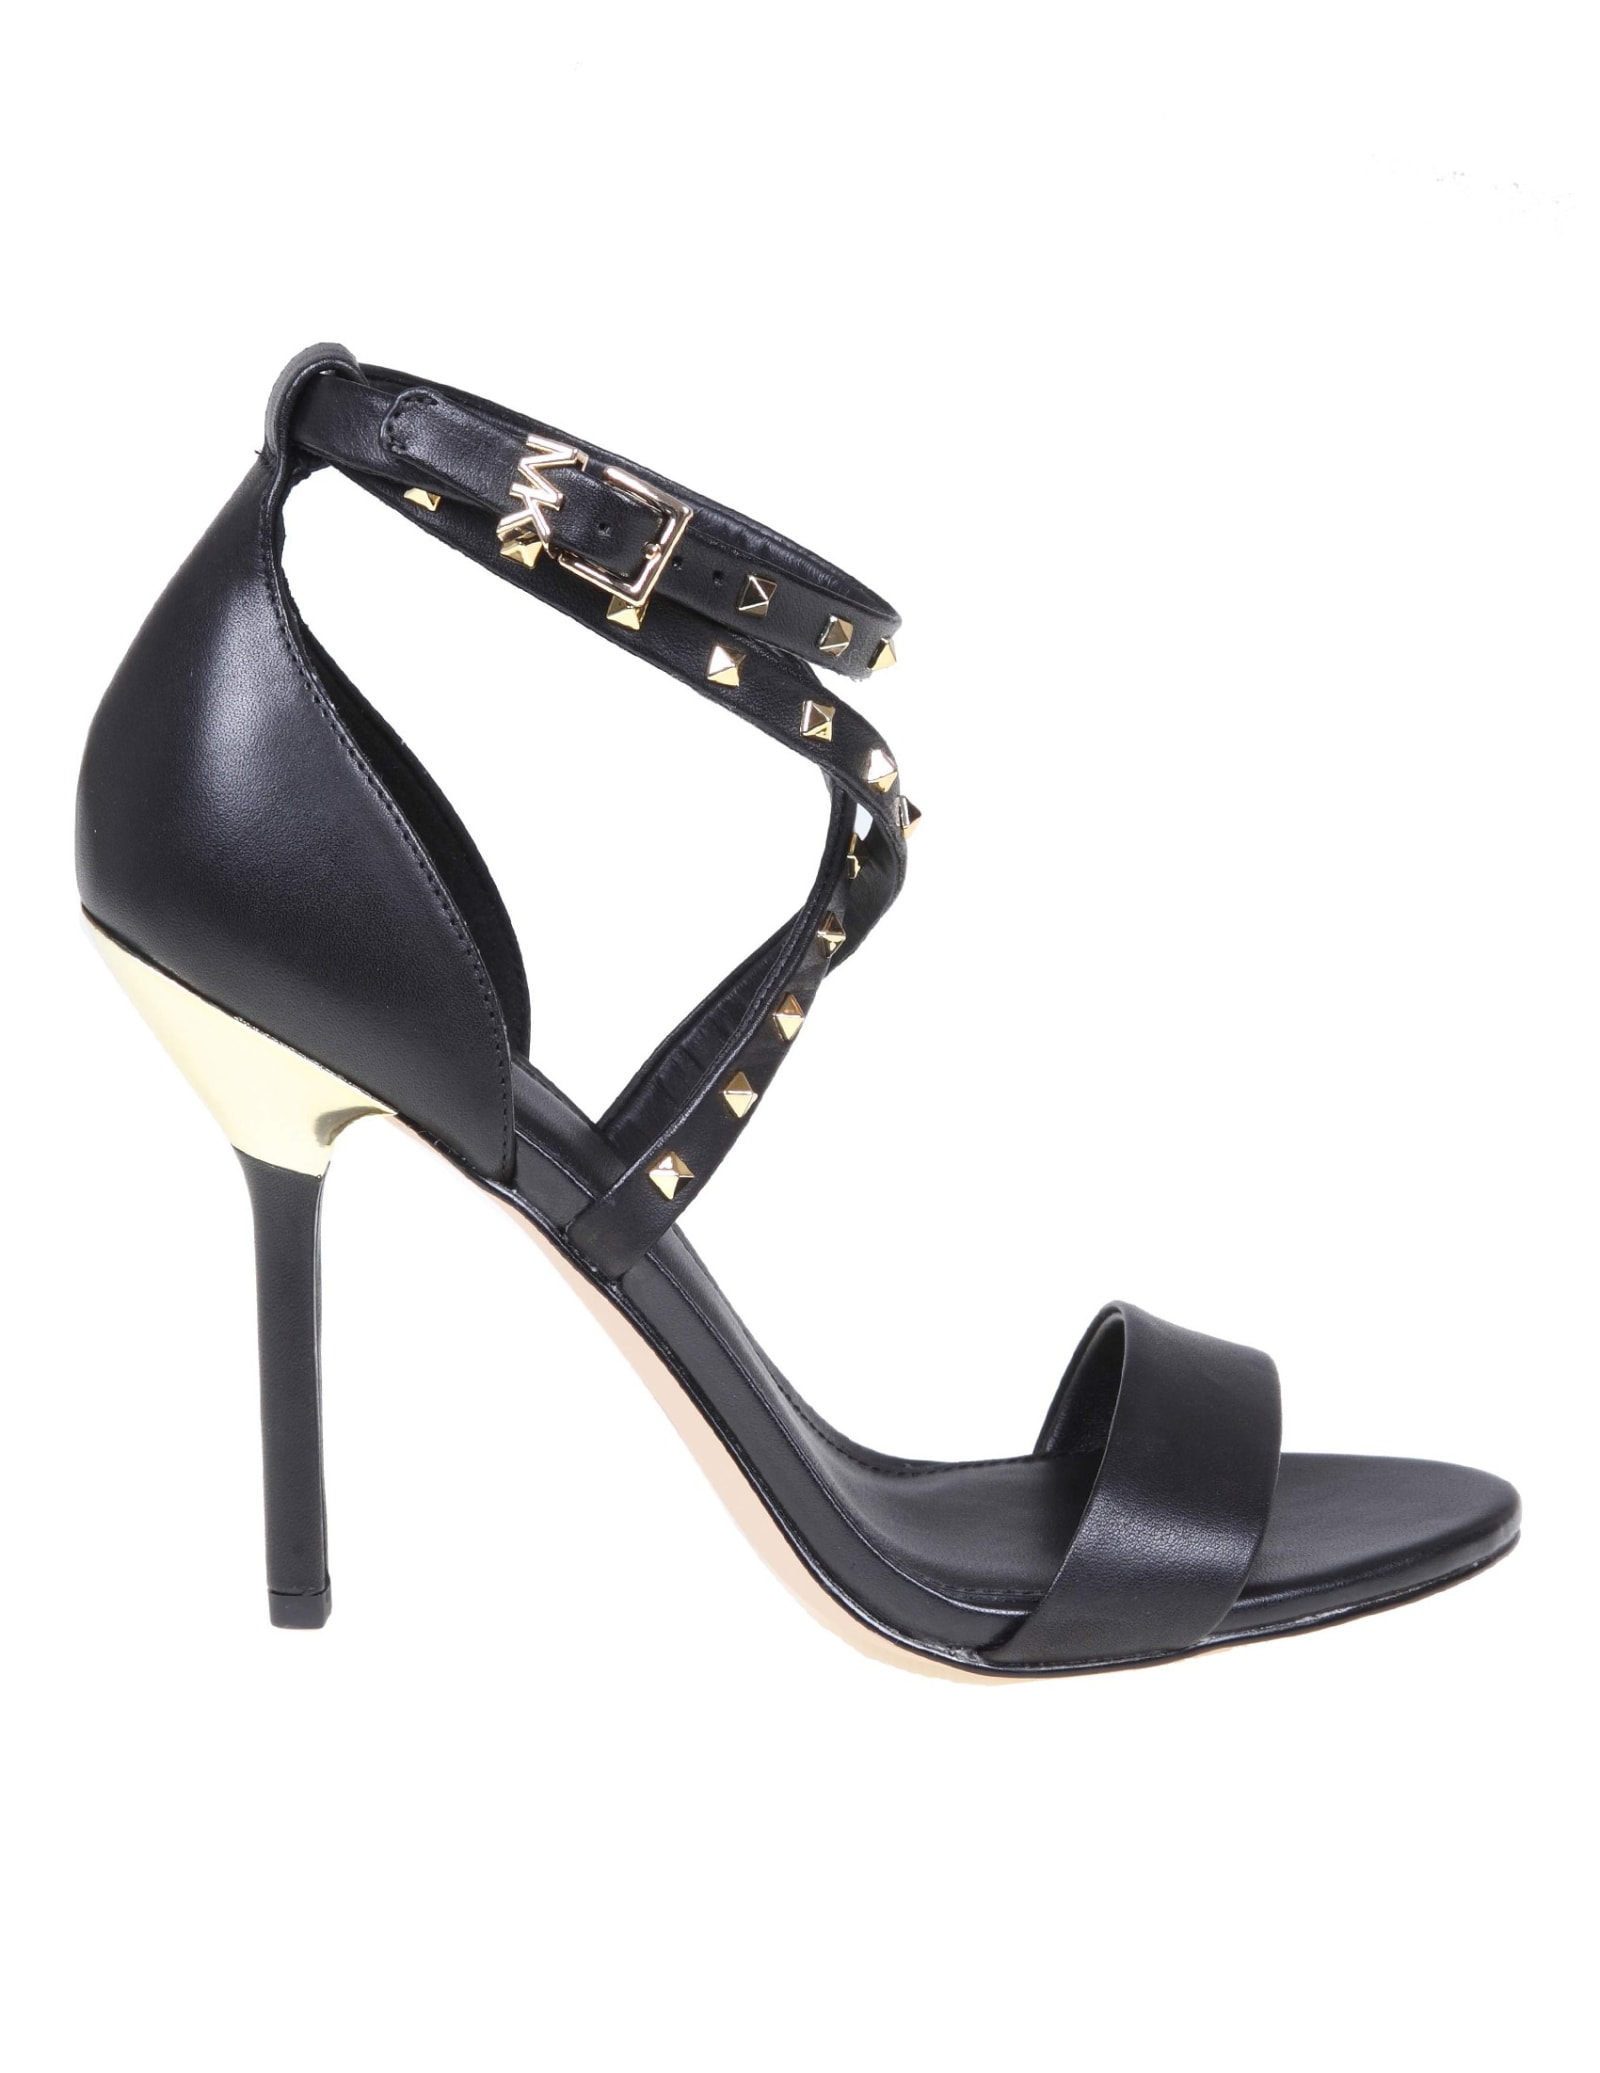 Michael Kors Astrid Leather Sandal With Applied Studs